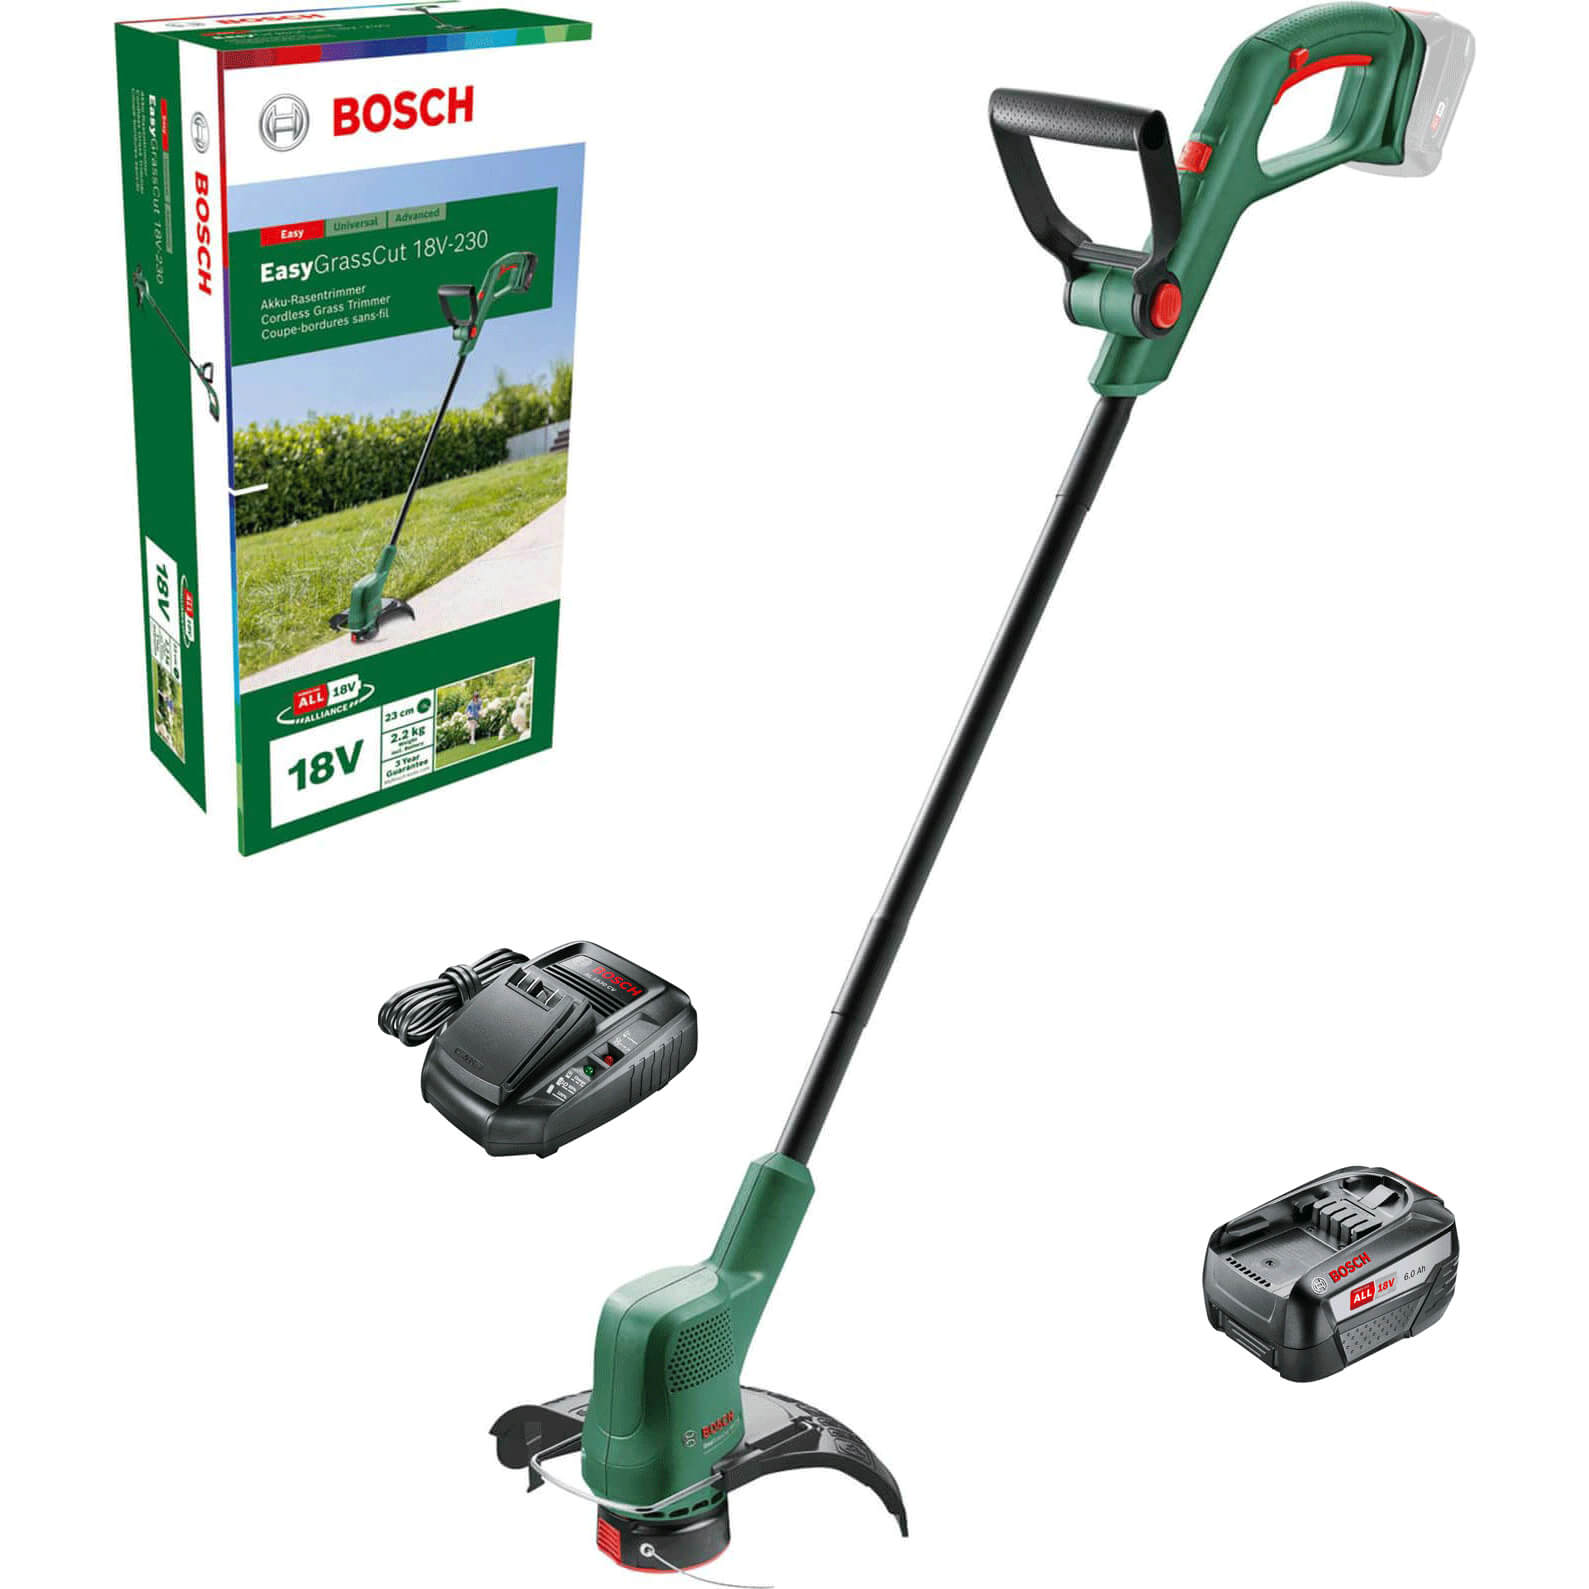 Image of Bosch EASYGRASSCUT 18V-230 18v Cordless Grass Trimmer and Edger 230mm 1 x 6ah Li-ion Charger